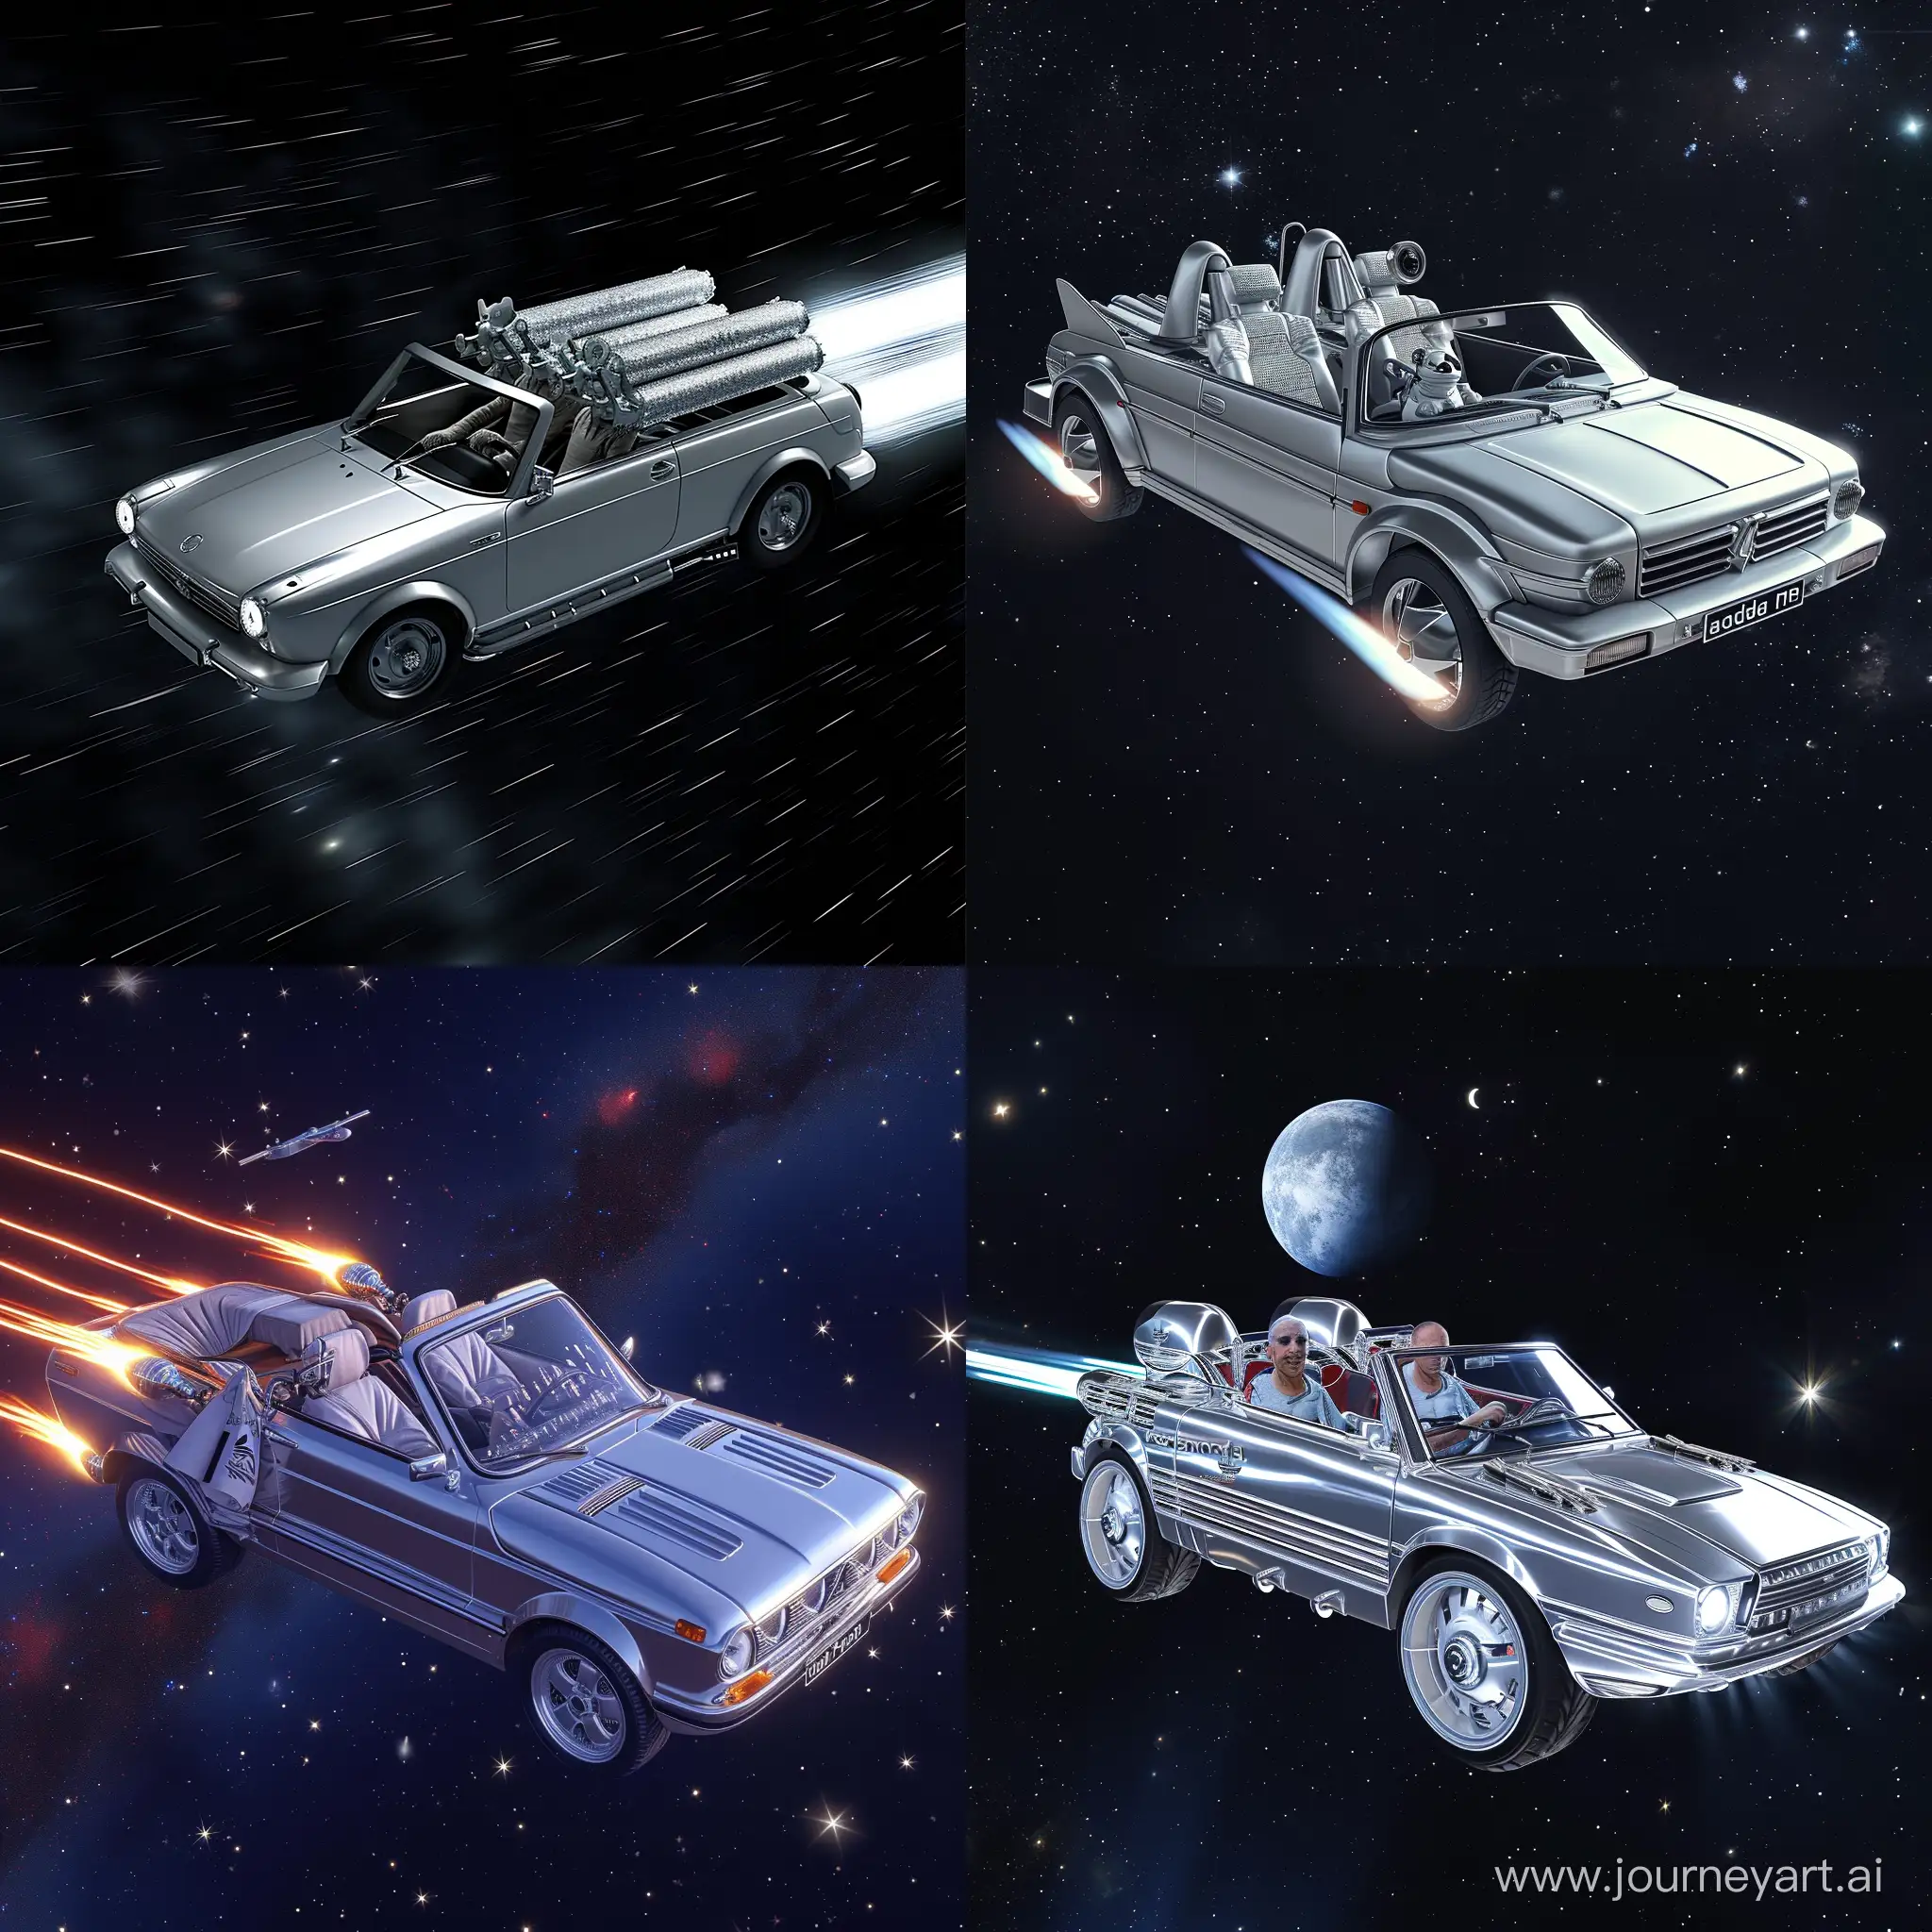 Silver lada priora cabrio with gopnik in adidas inside, with ionic thrusters, is flying in space, realistic ,hd